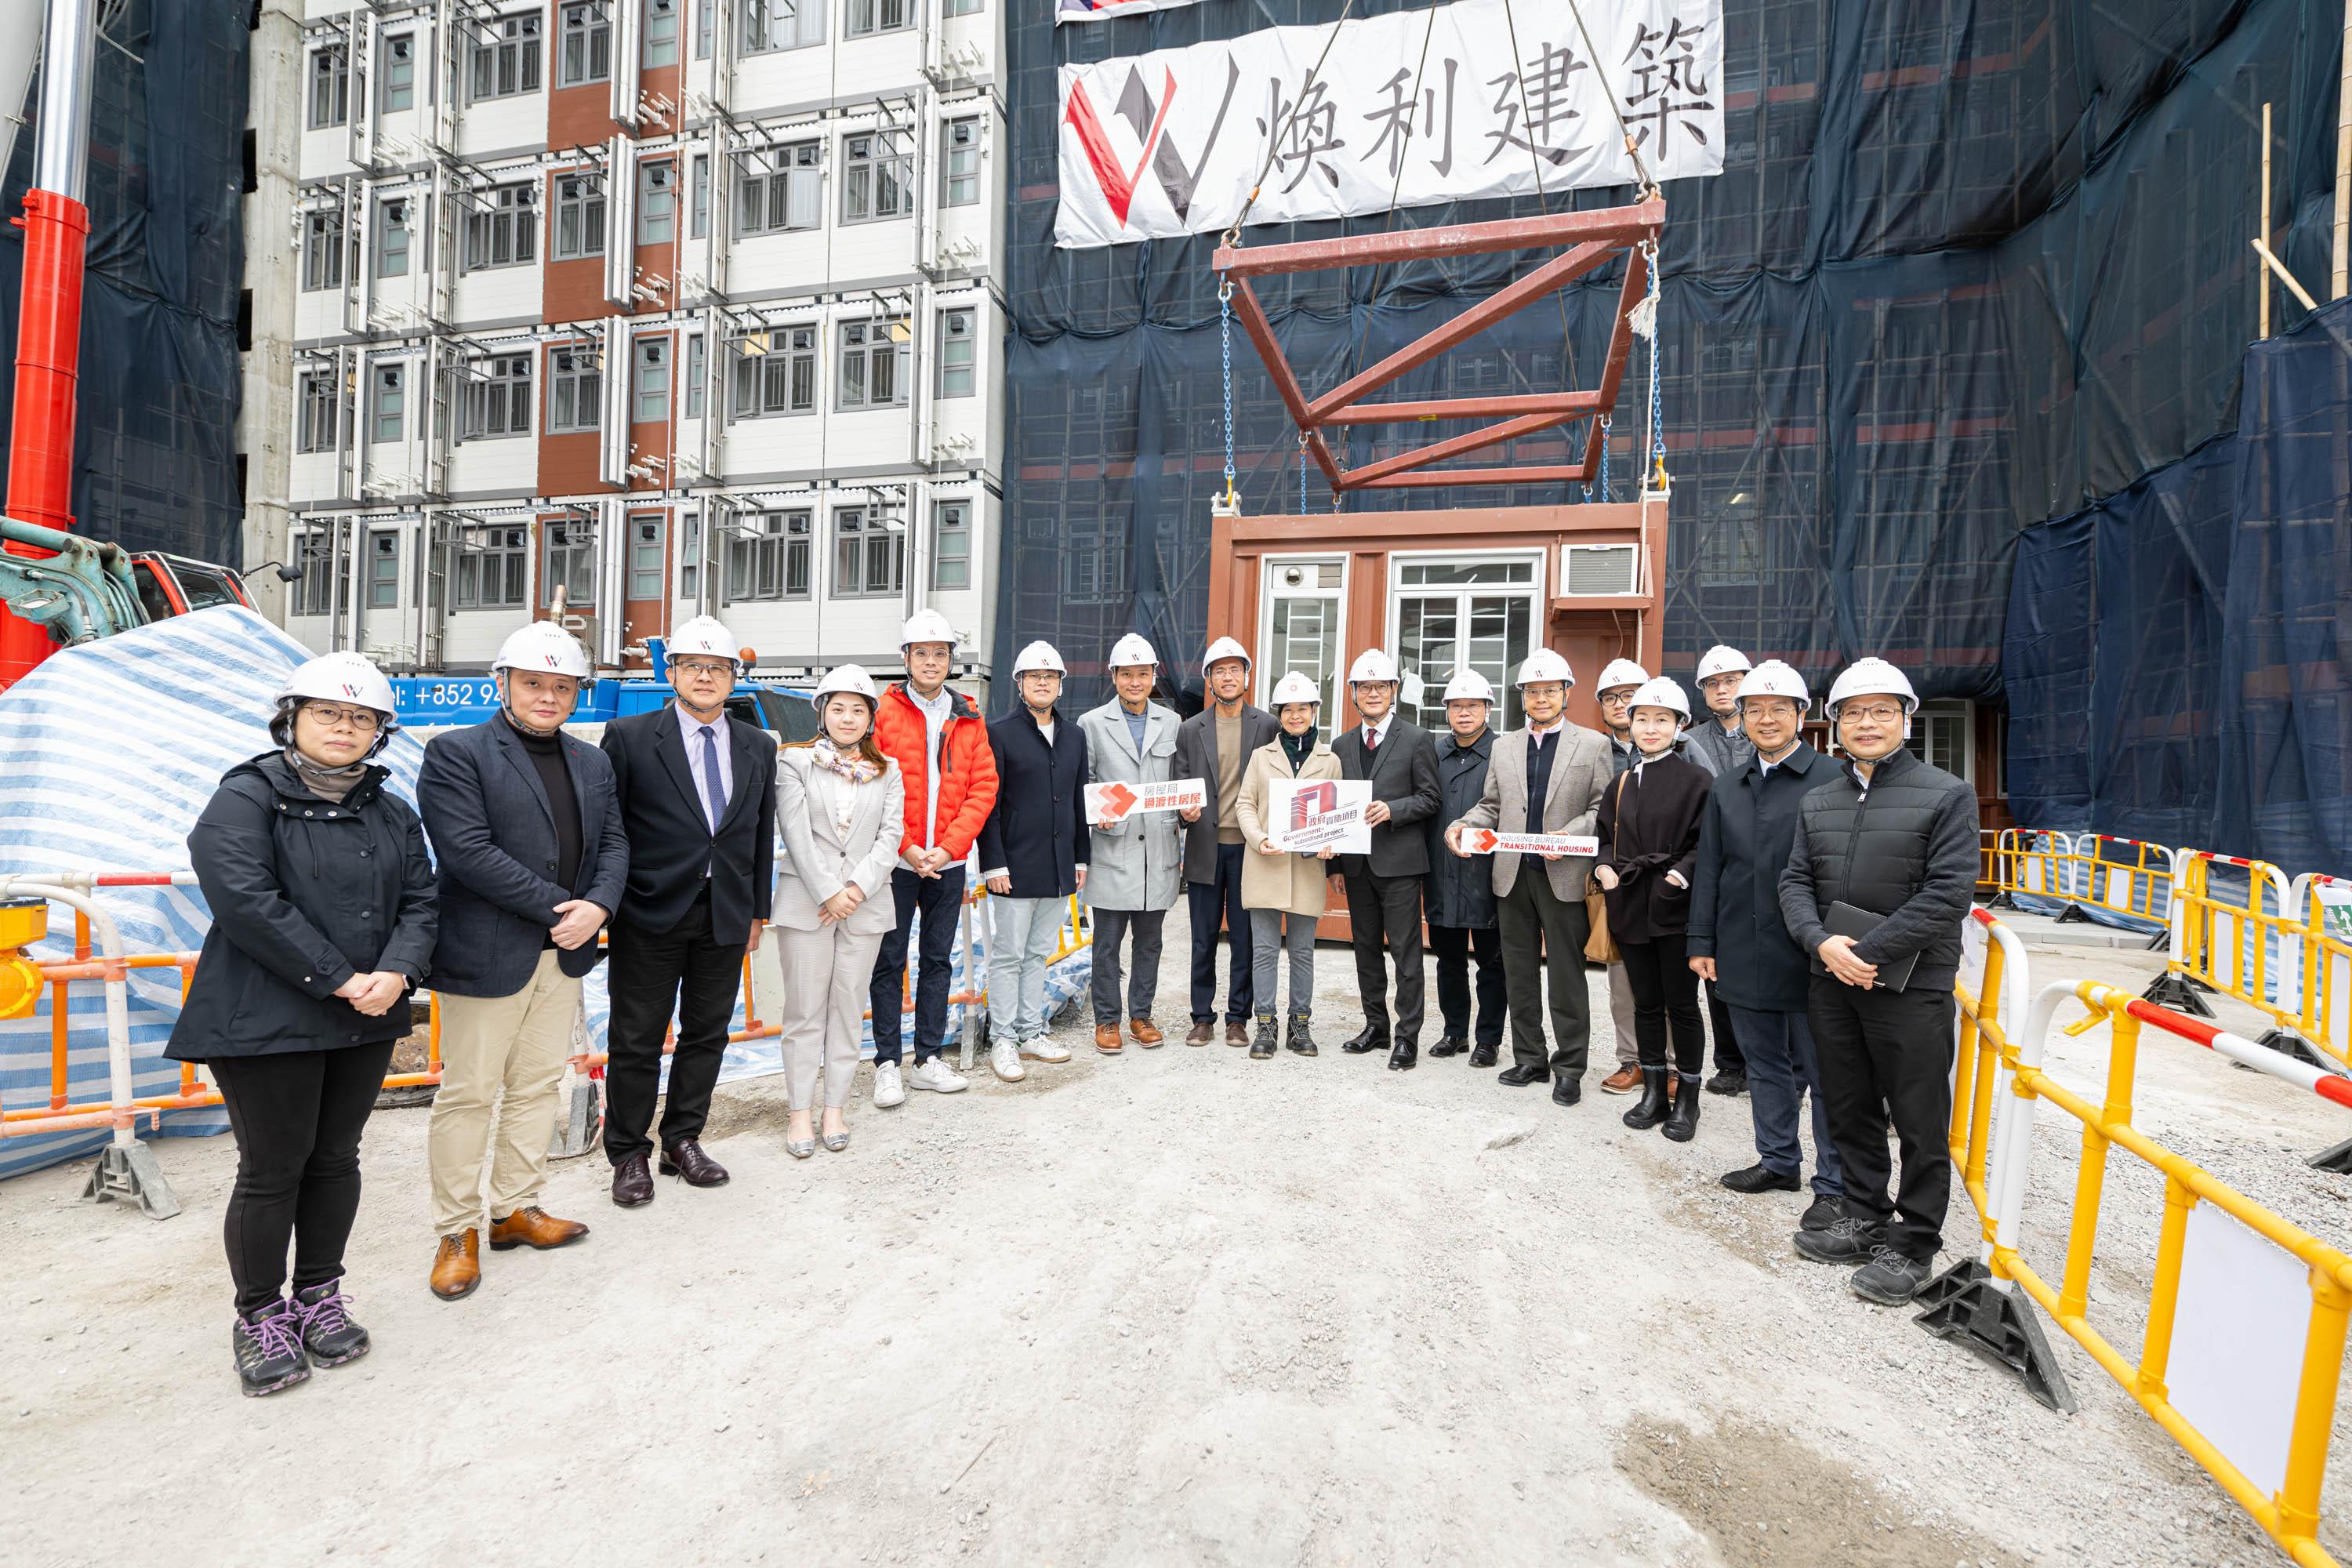 The Legislative Council (LegCo) Public Works Subcommittee visited the Choi Hing Road transitional housing project in Ngau Tau Kok today (January 29). Photo shows the Chairman of the Public Works Subcommittee, Mr Tony Tse (10th left); the Secretary for Housing, Ms Winnie Ho (ninth left); the Chairman of the Lok Sin Tong Benevolent Society, Kowloon, Mr Lee Shing-kan (eighth left); other LegCo Members, and other representatives of the Government at the project construction site.
